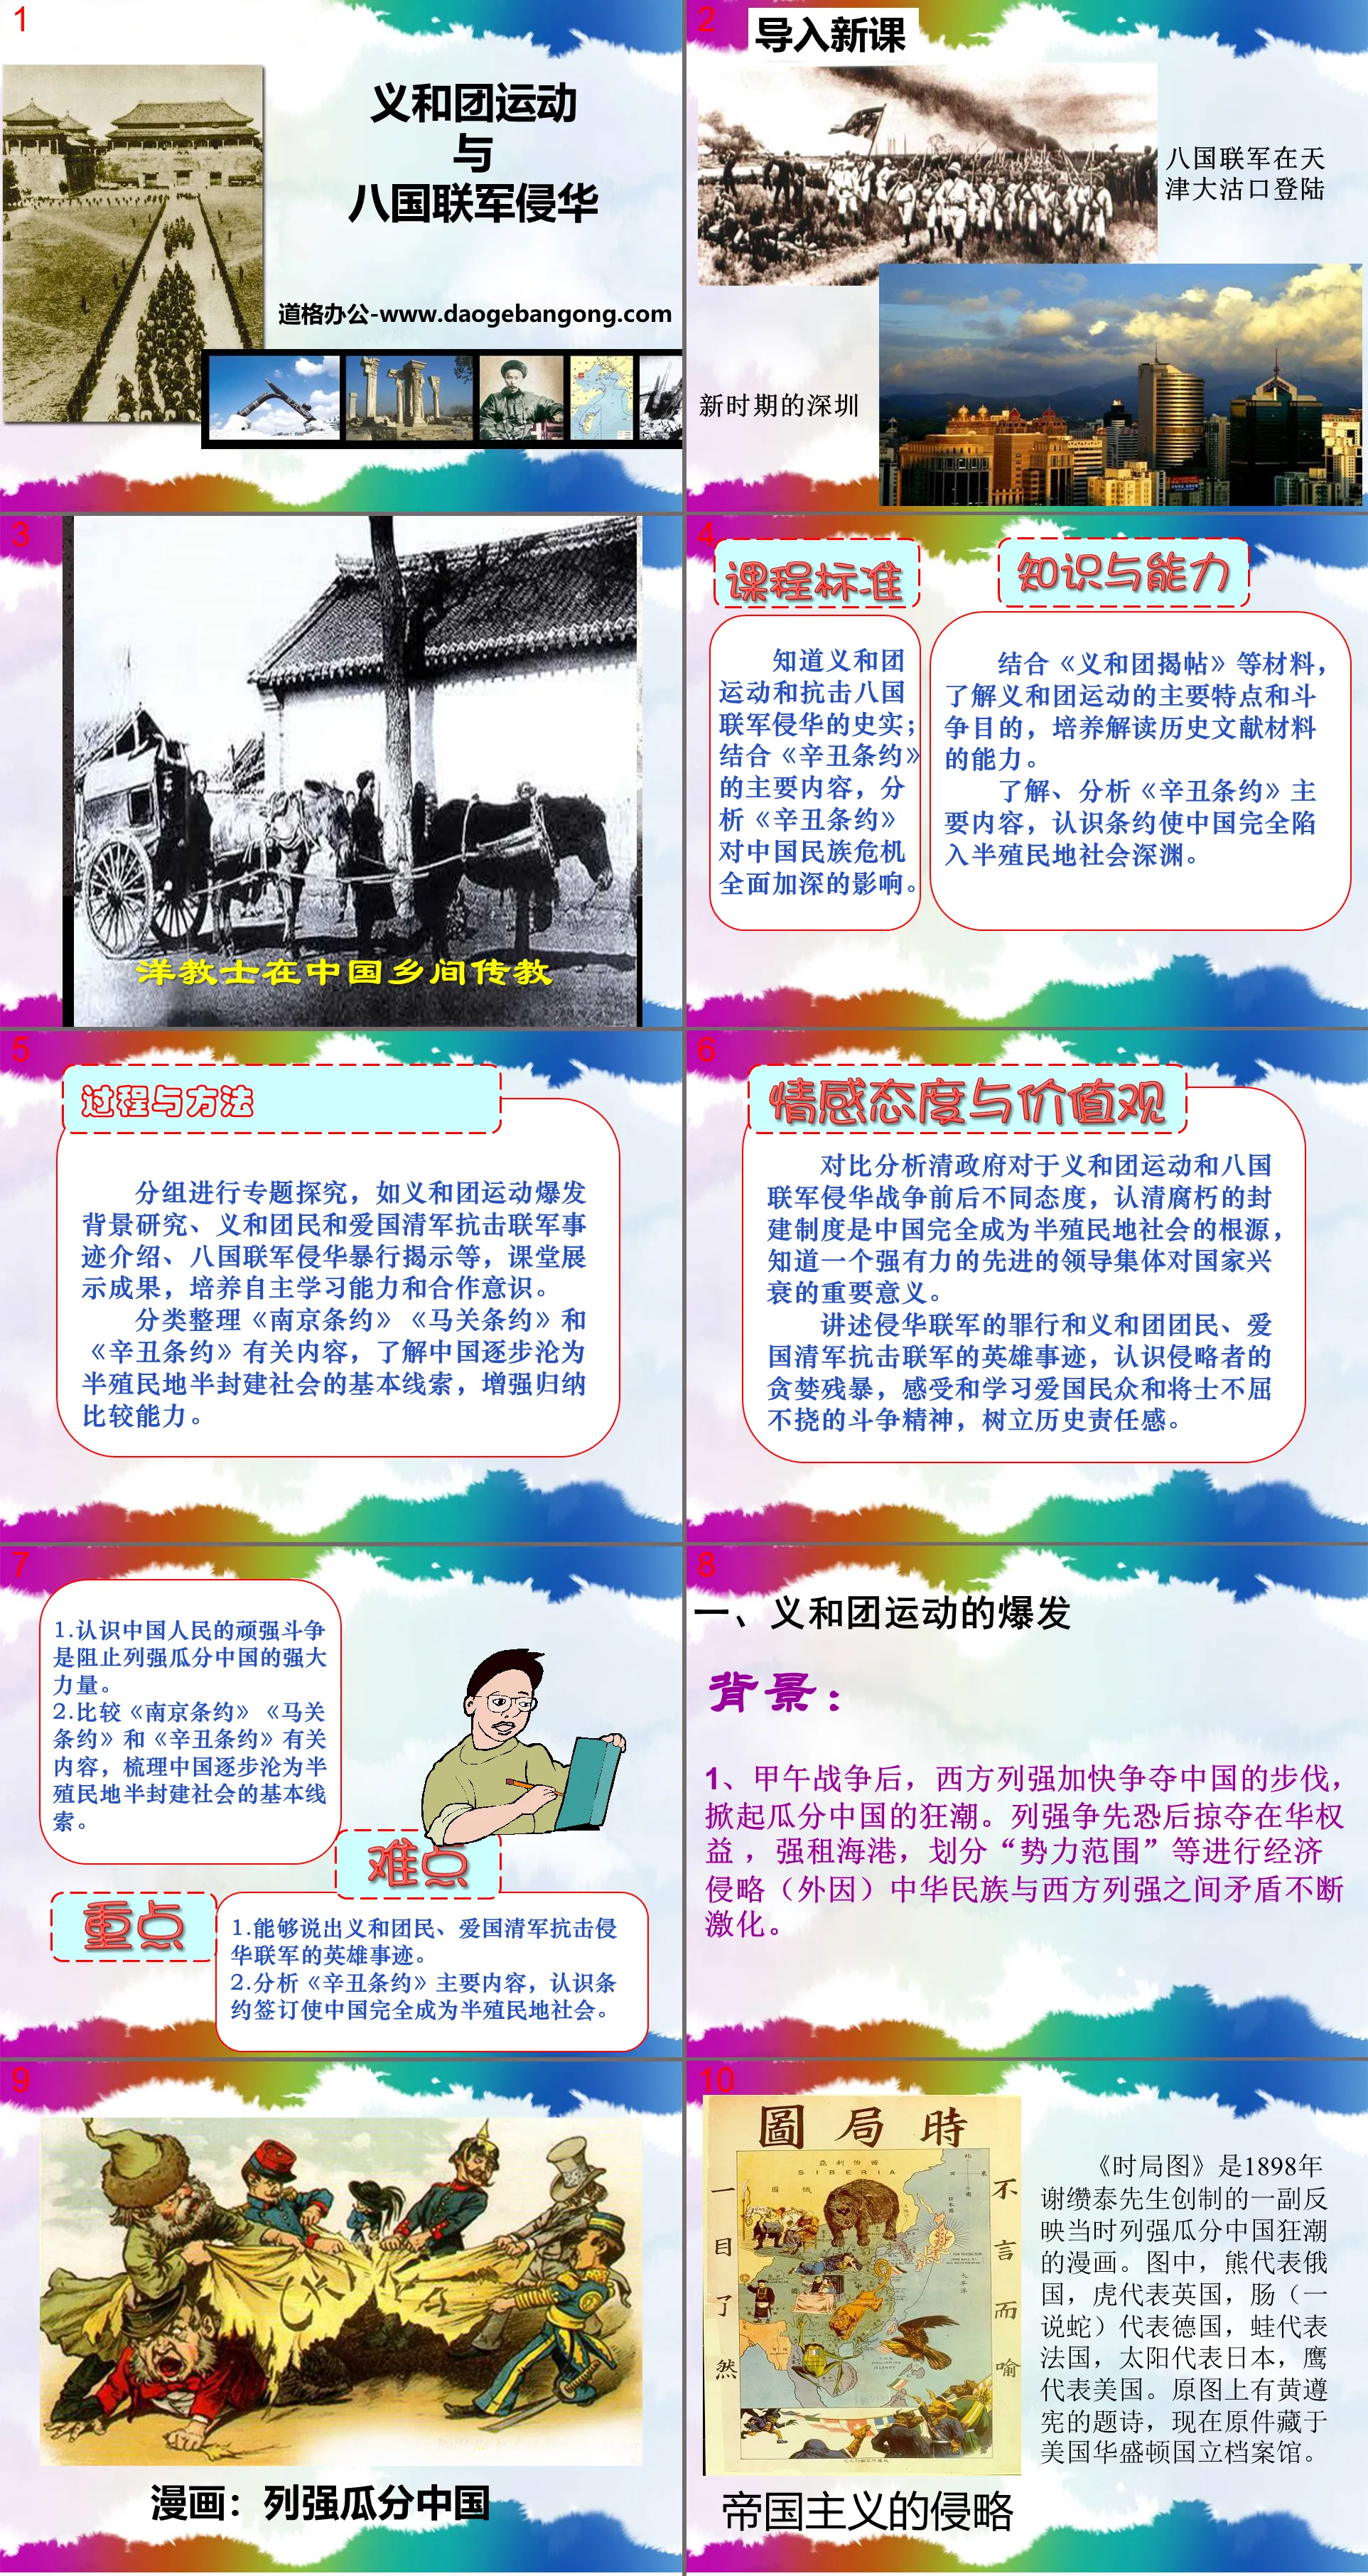 "The Boxer Rebellion and the Eight-Power Allied Forces' Invasion of China" The invasion of foreign powers and the resistance of the Chinese people PPT courseware 2